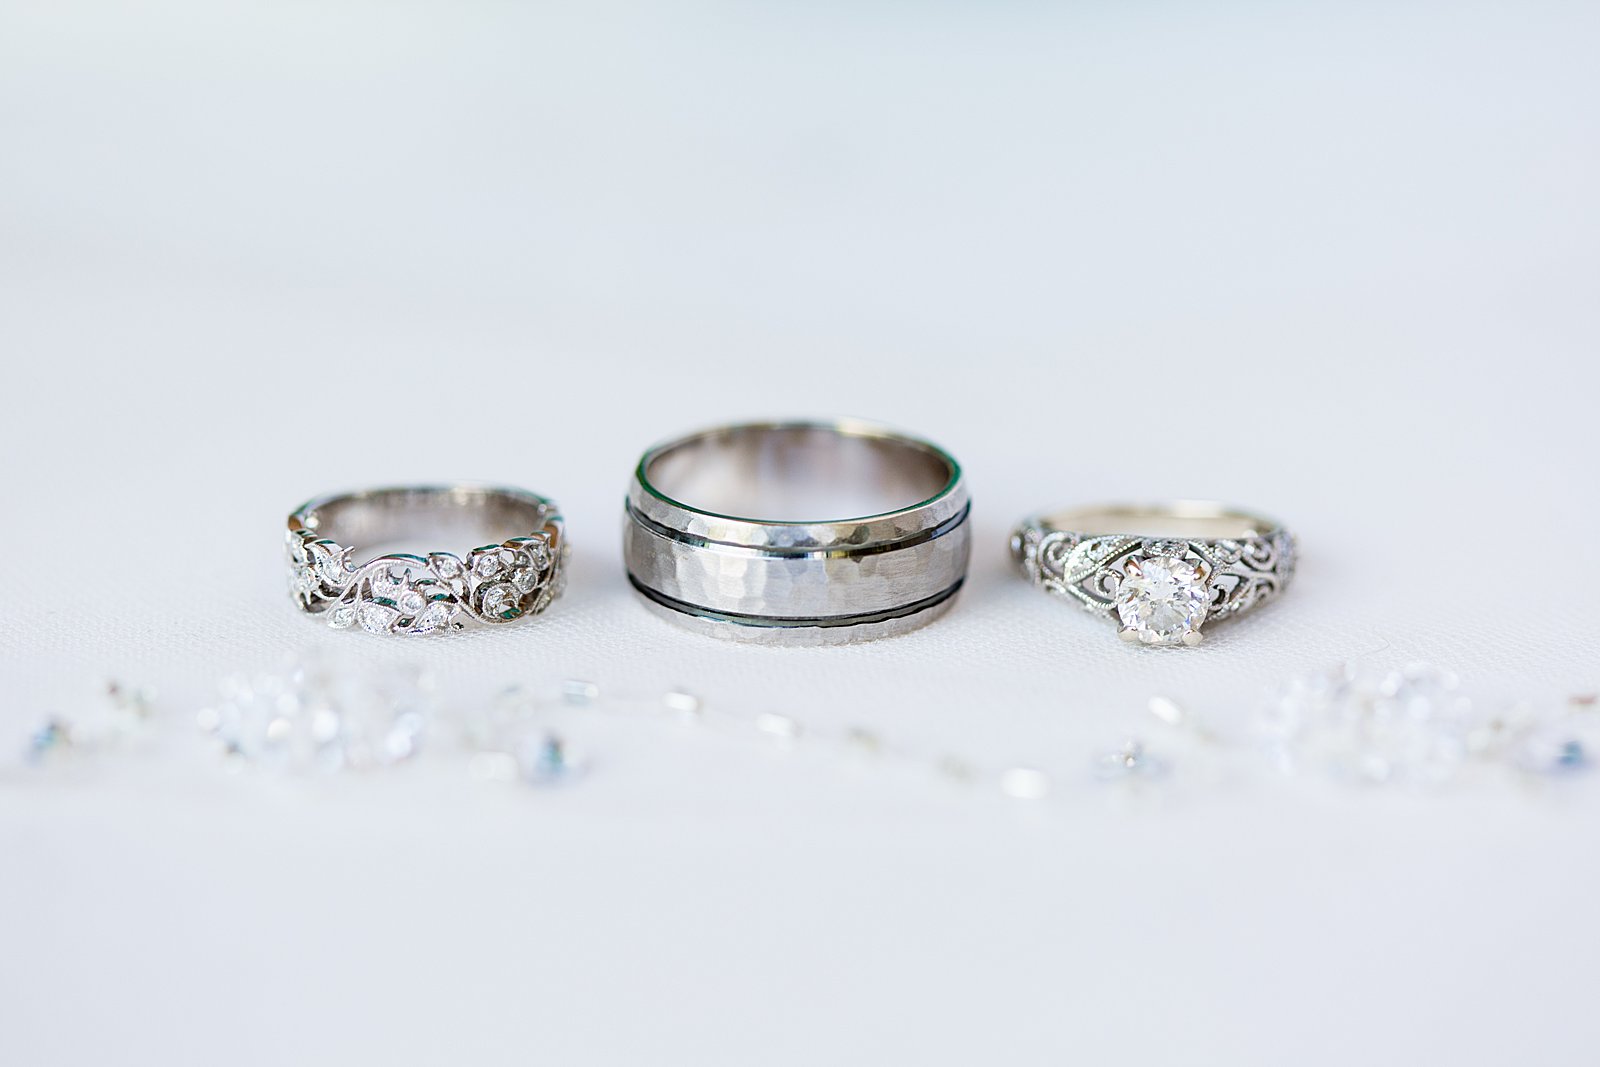 White gold and diamond floral inspired wedding bands by PMA Photography.